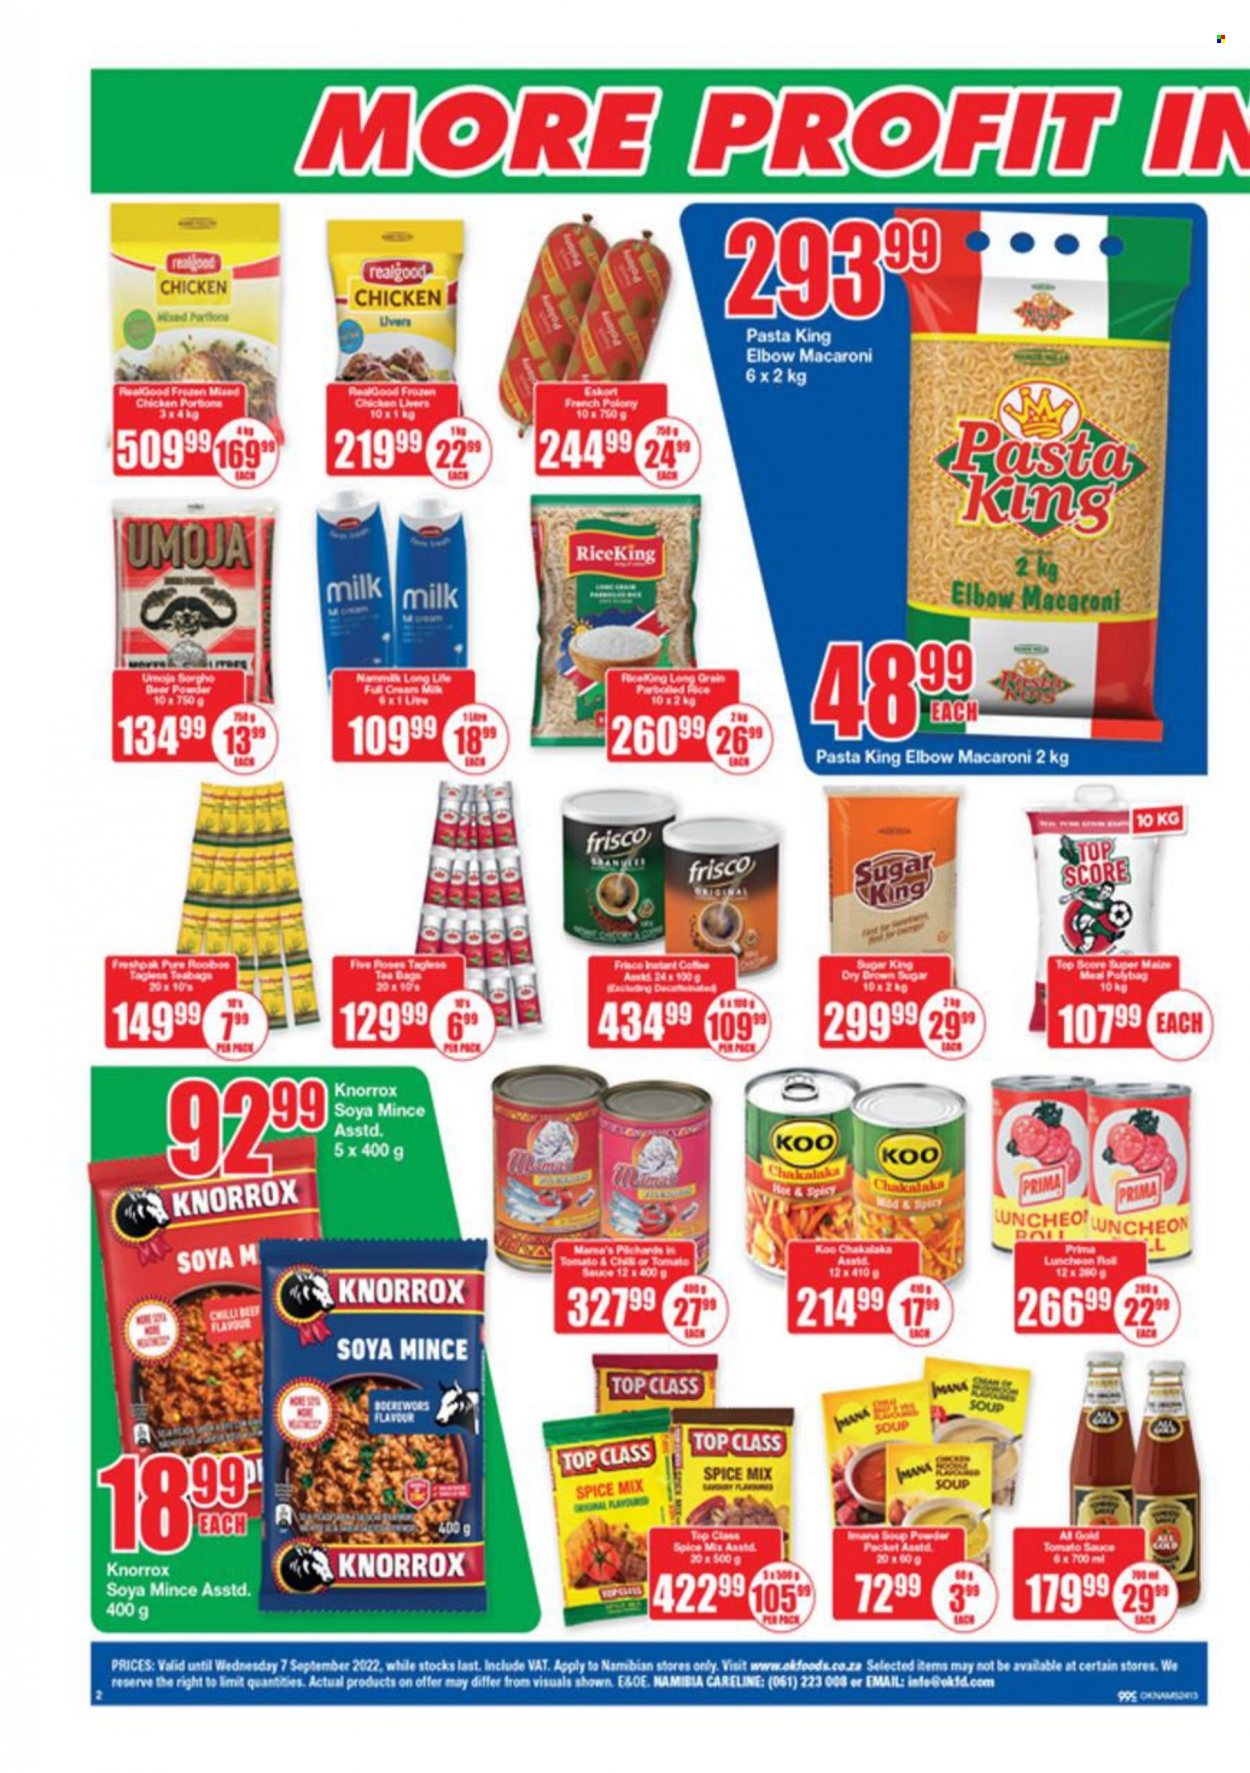 OK catalogue  - 19/08/2022 - 07/09/2022 - Sales products - macaroni, soup, pasta, chakalaka, french polony, polony, lunch meat, milk, sugar, maize meal, soya mince, Knorrox, Koo, spice, tea bags, rooibos tea, instant coffee, Frisco, chicken livers, chicken meat, braai wors. Page 2.